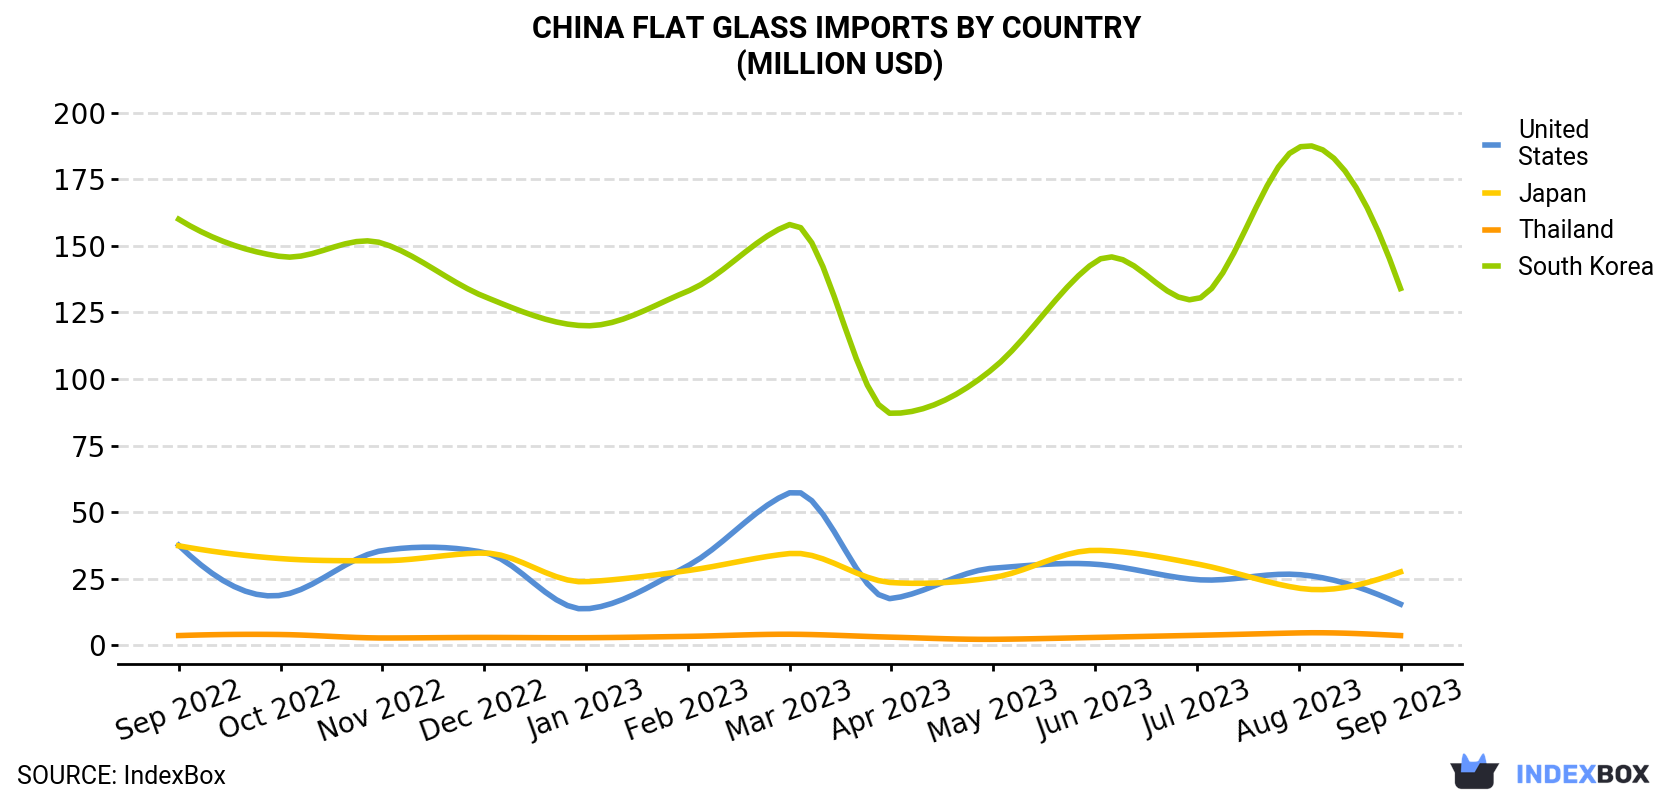 China Flat Glass Imports By Country (Million USD)